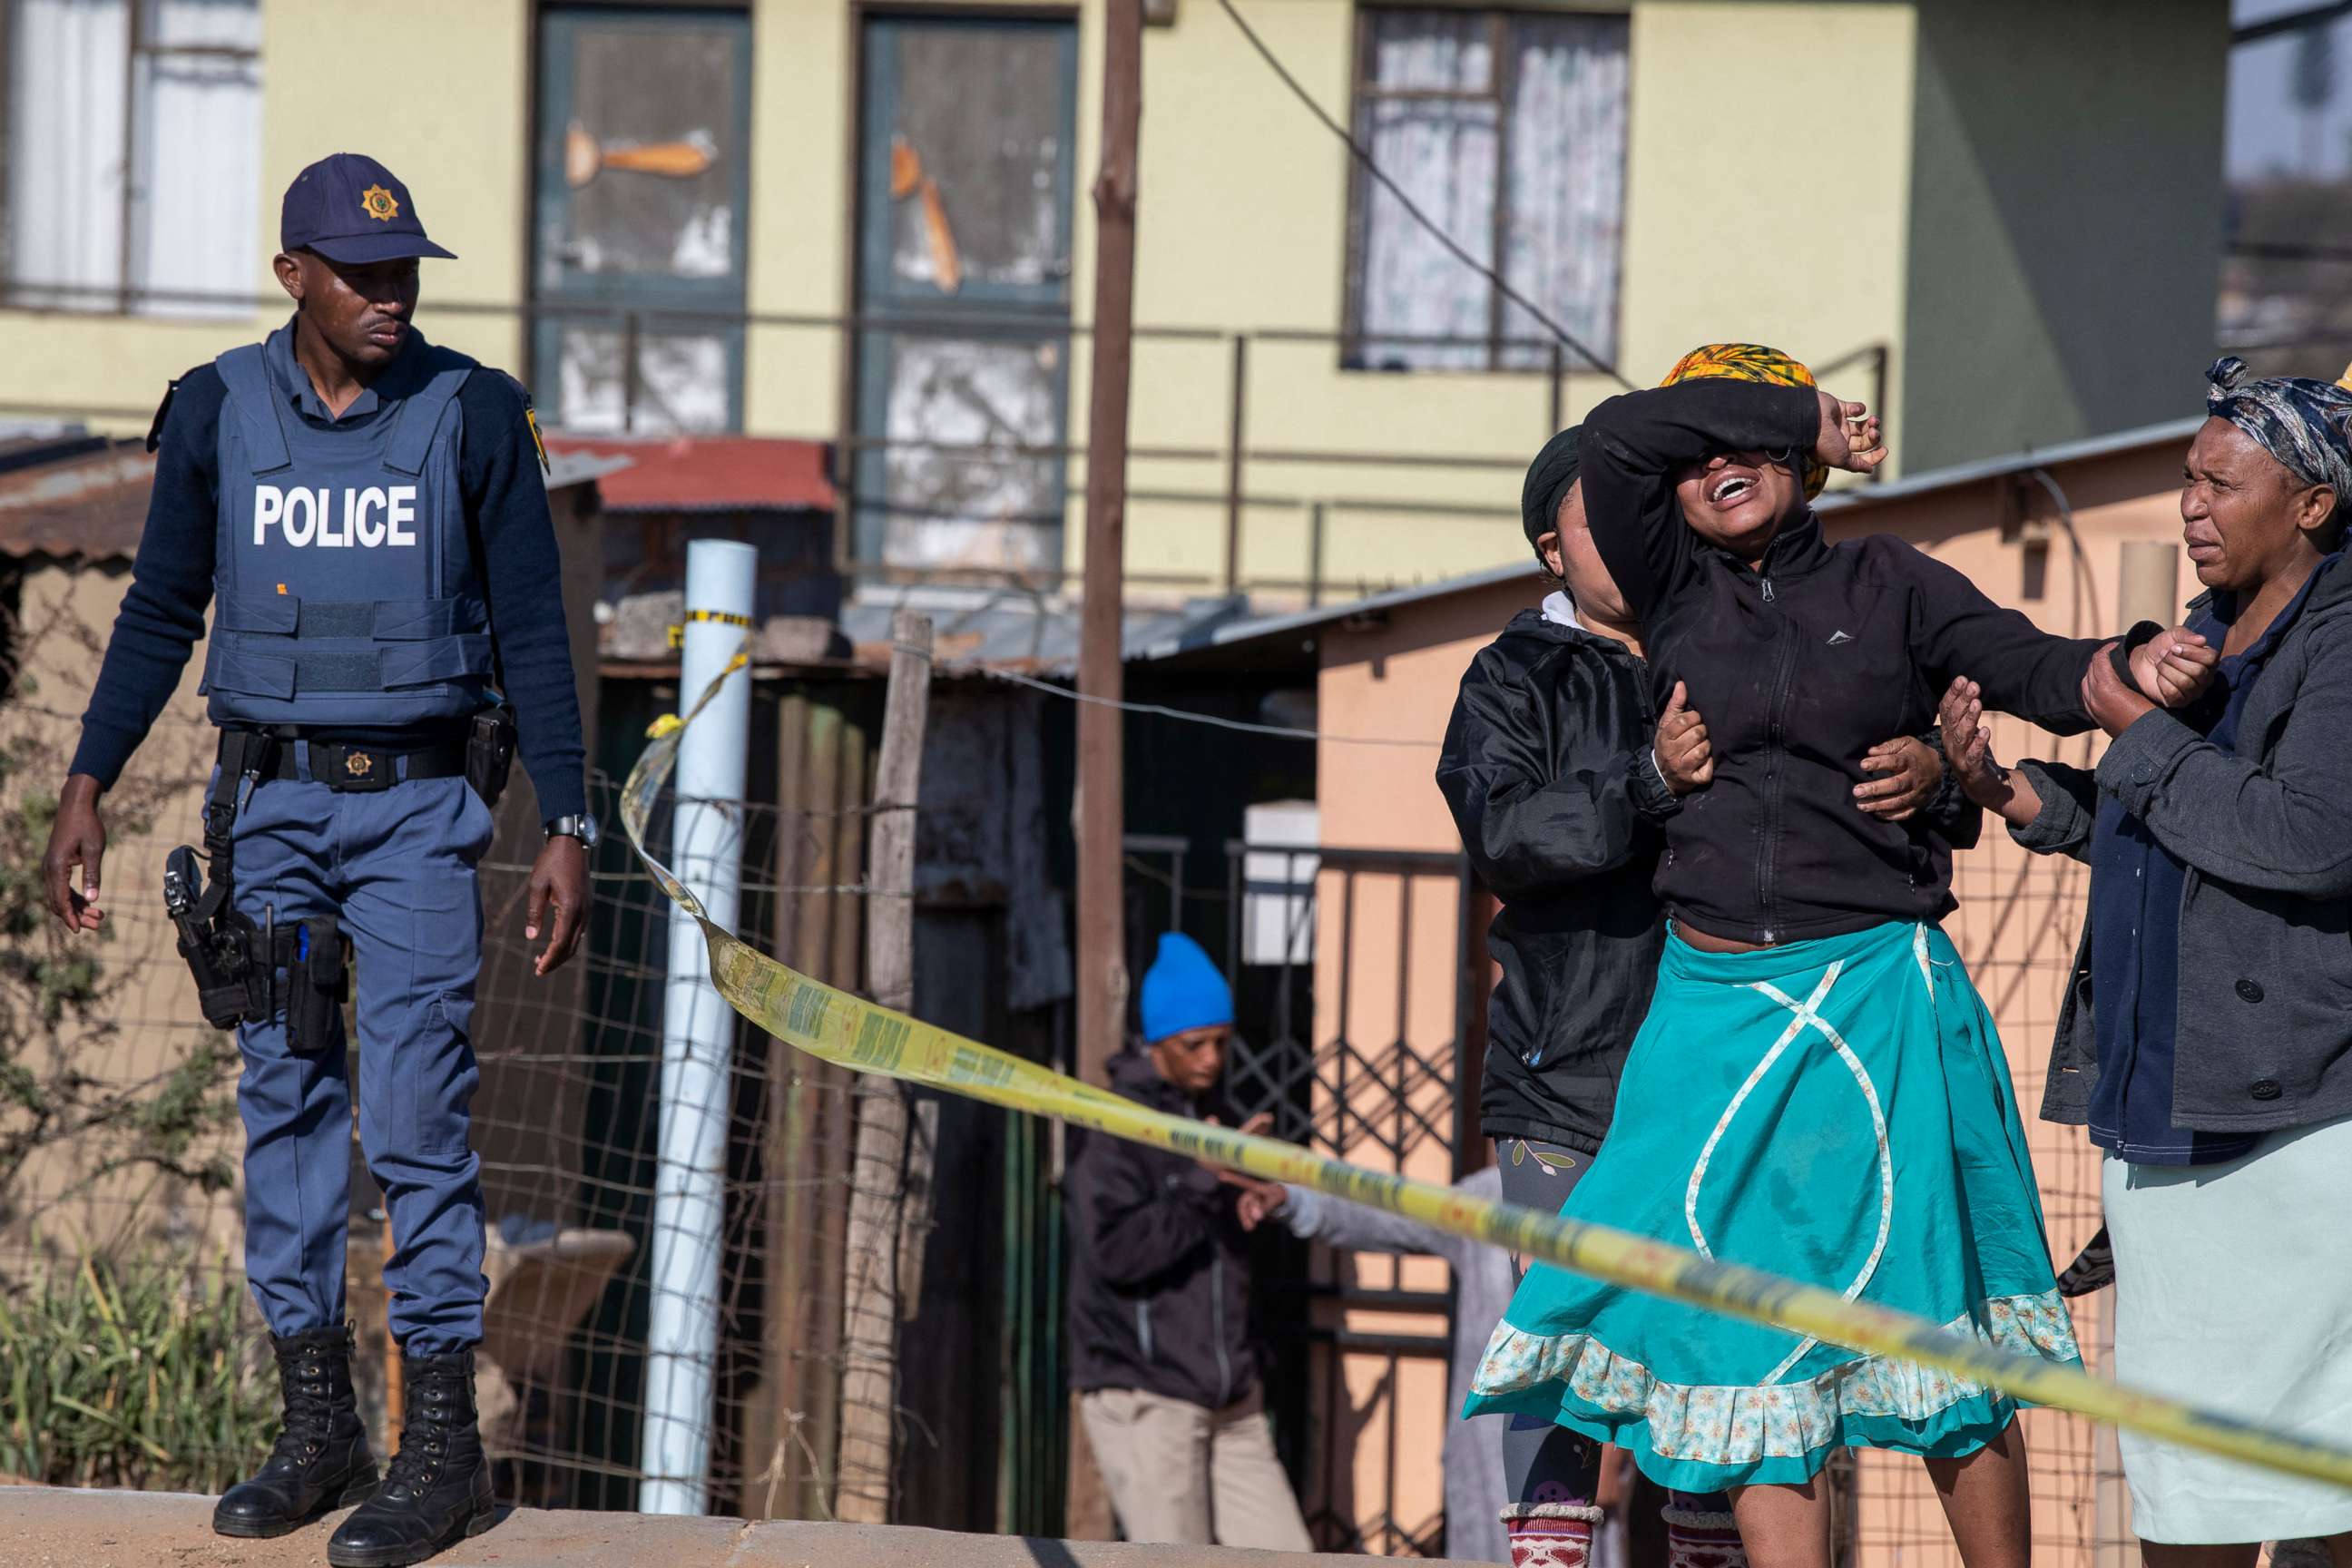 PHOTO: A relative of one of the victims of a bar shooting cries as south African Police Service officers refuse to let her cross the police barrier and enter the crime scene in Soweto, South Africa, on July 10, 2022.